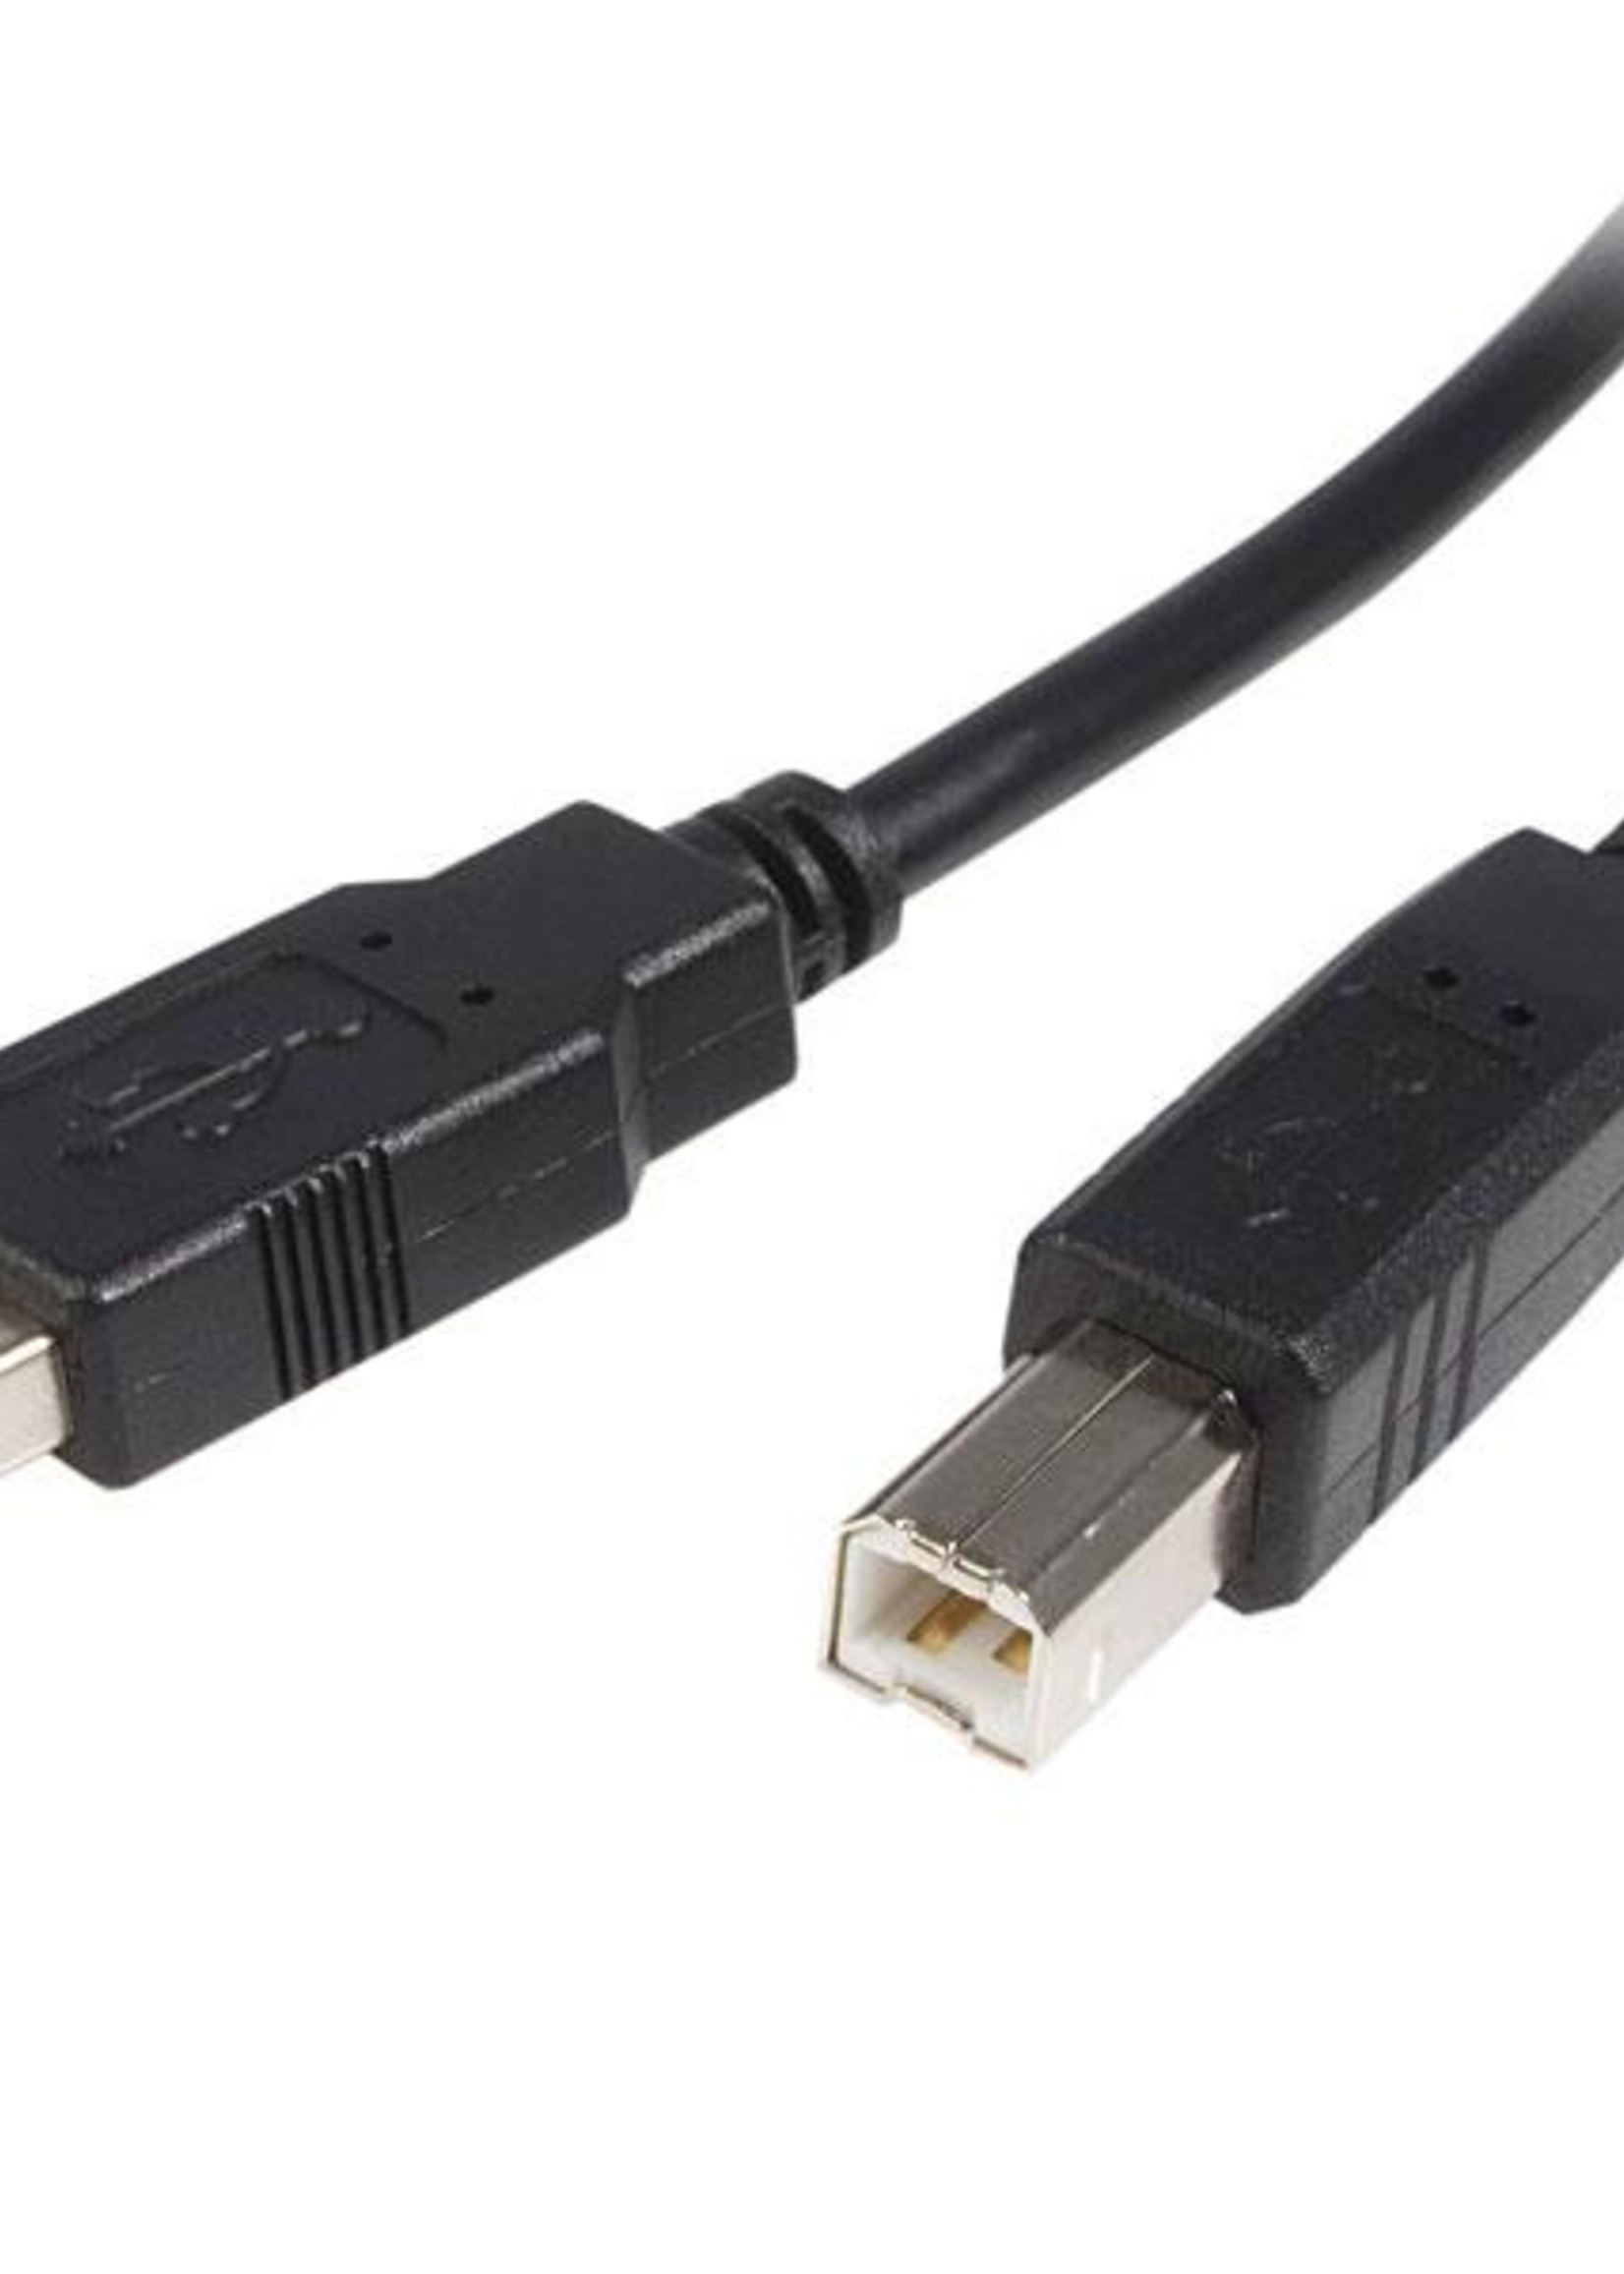 5m USB 2.0 A to B Cable - M/M